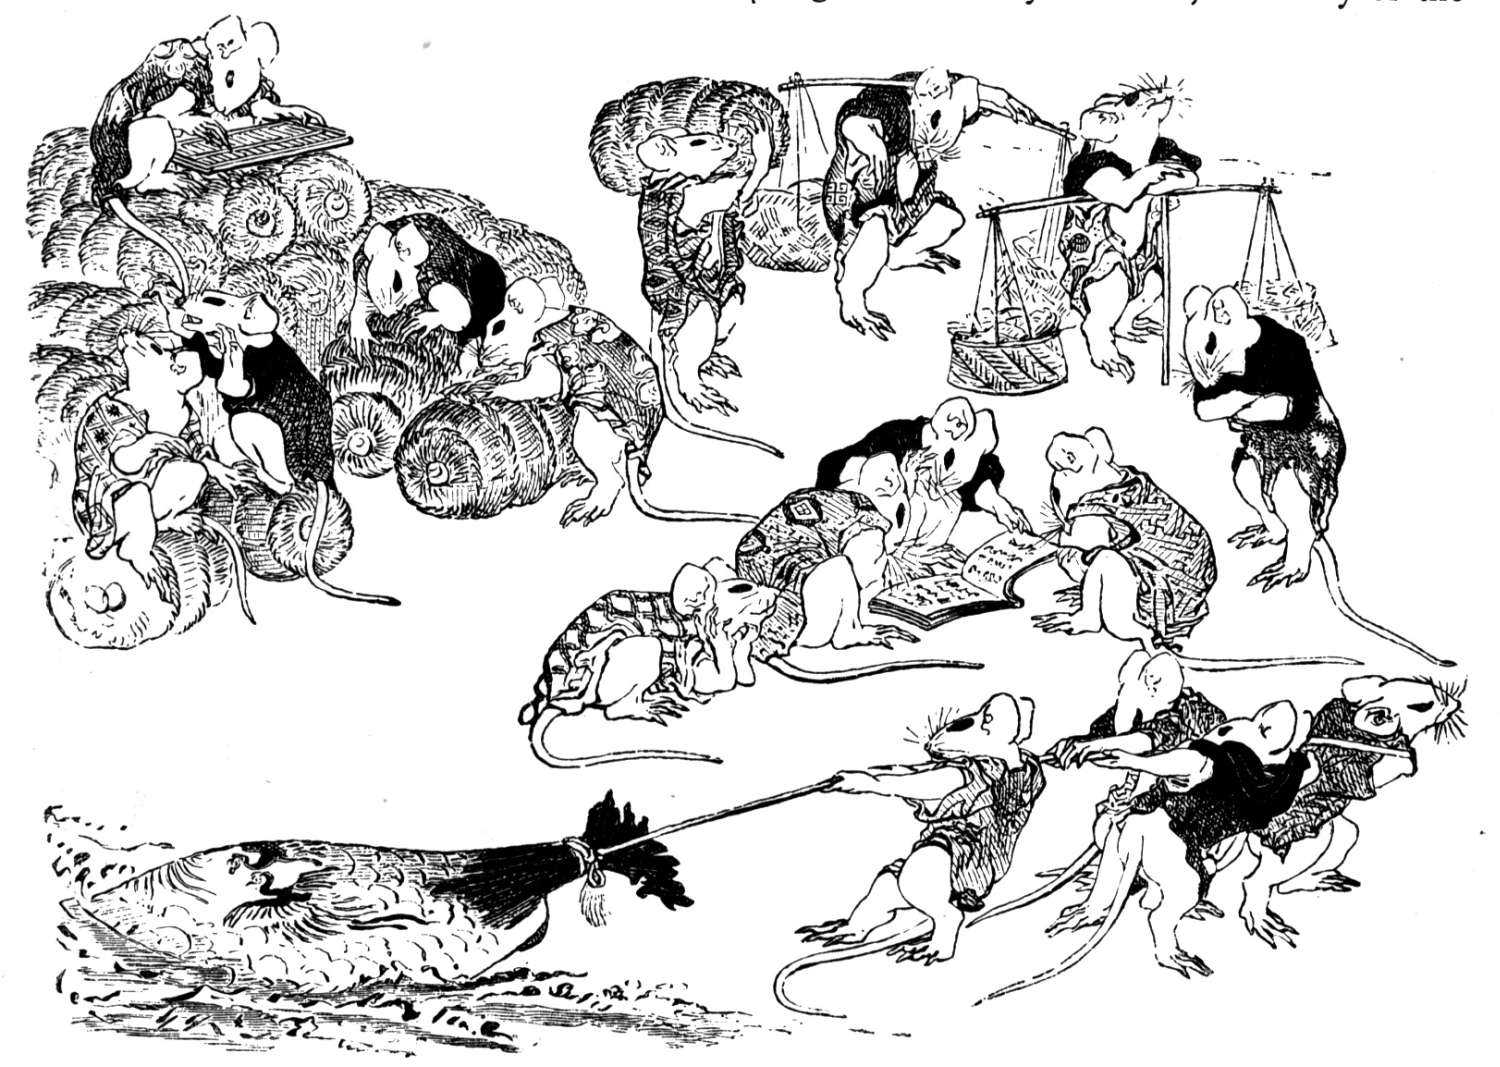 Black & white drawing of groups of rats dressed in oriental clothes and working like human villagers